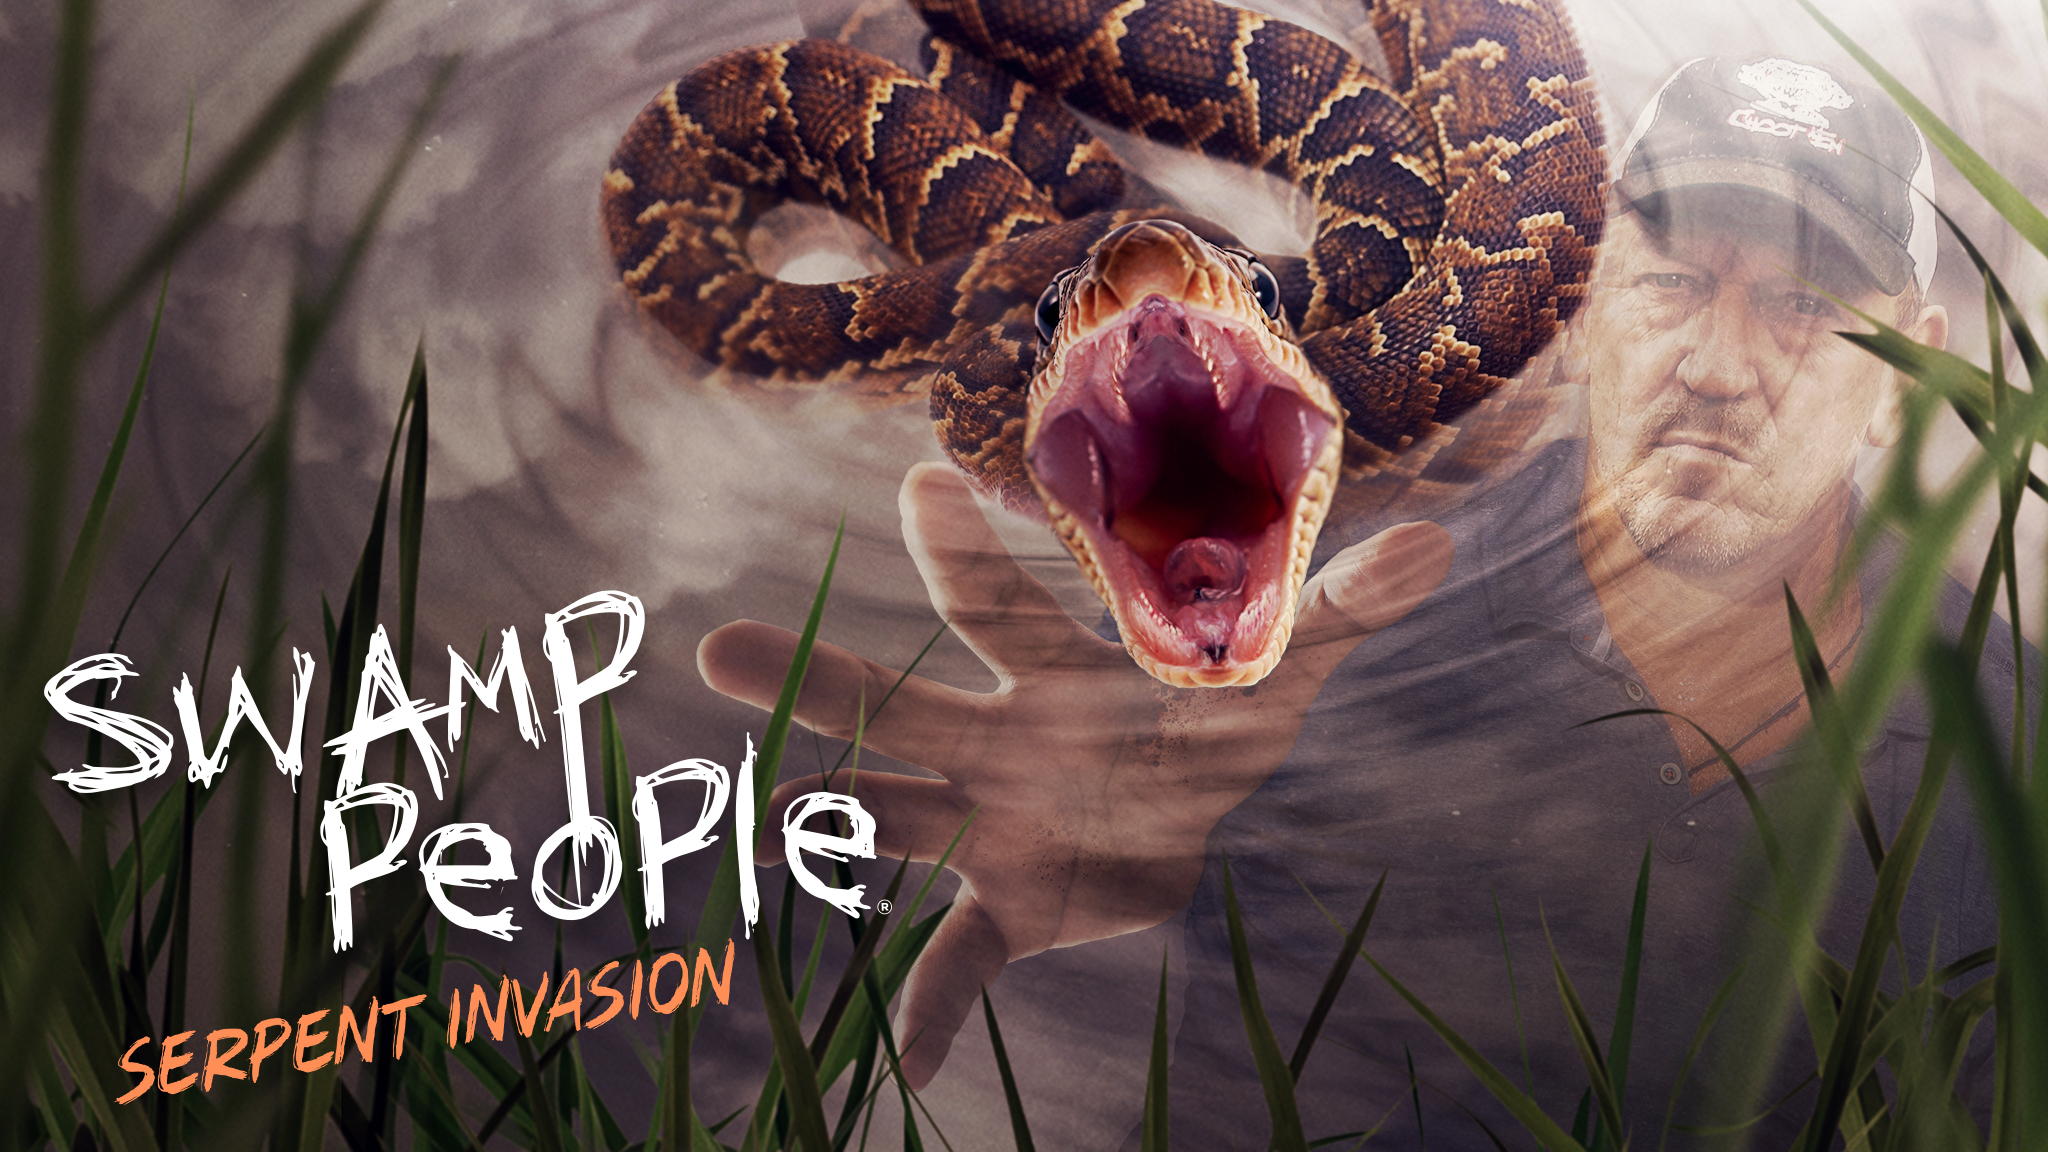 Watch Swamp People Serpent Invasion Full Episodes, Video & More